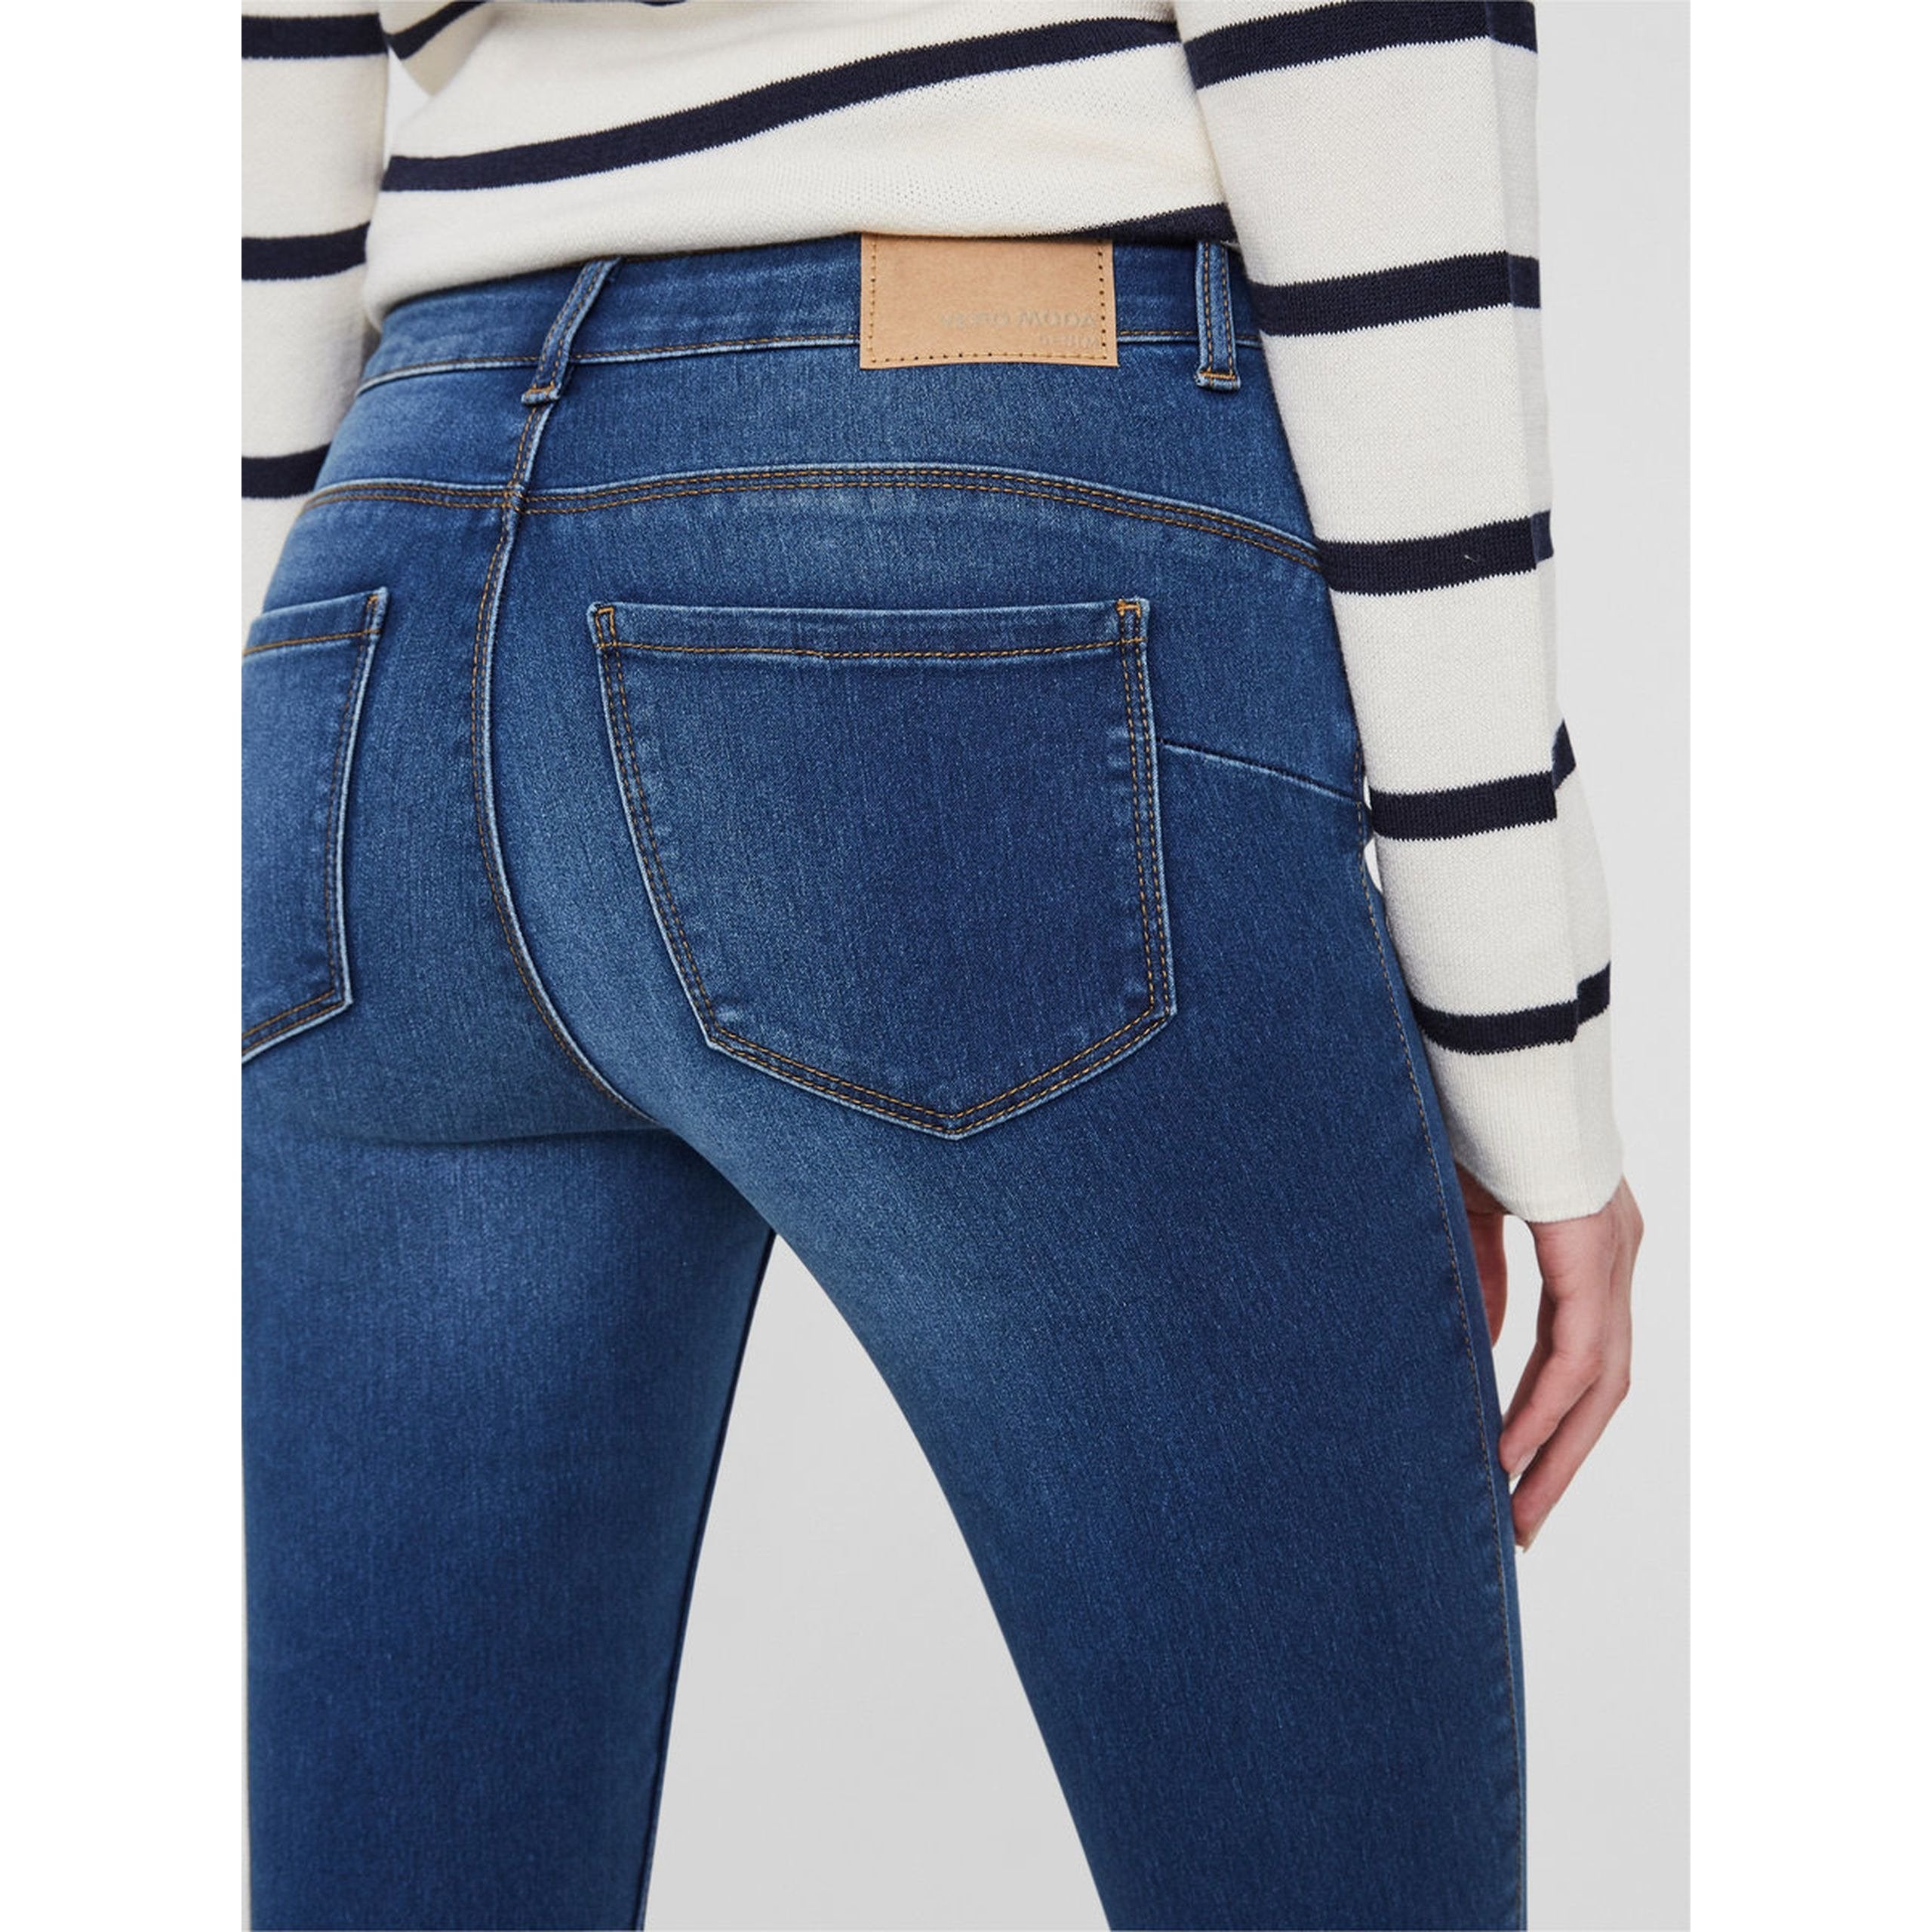 Vero Moda Jeans Review - Best in Comfort Style – The Cope